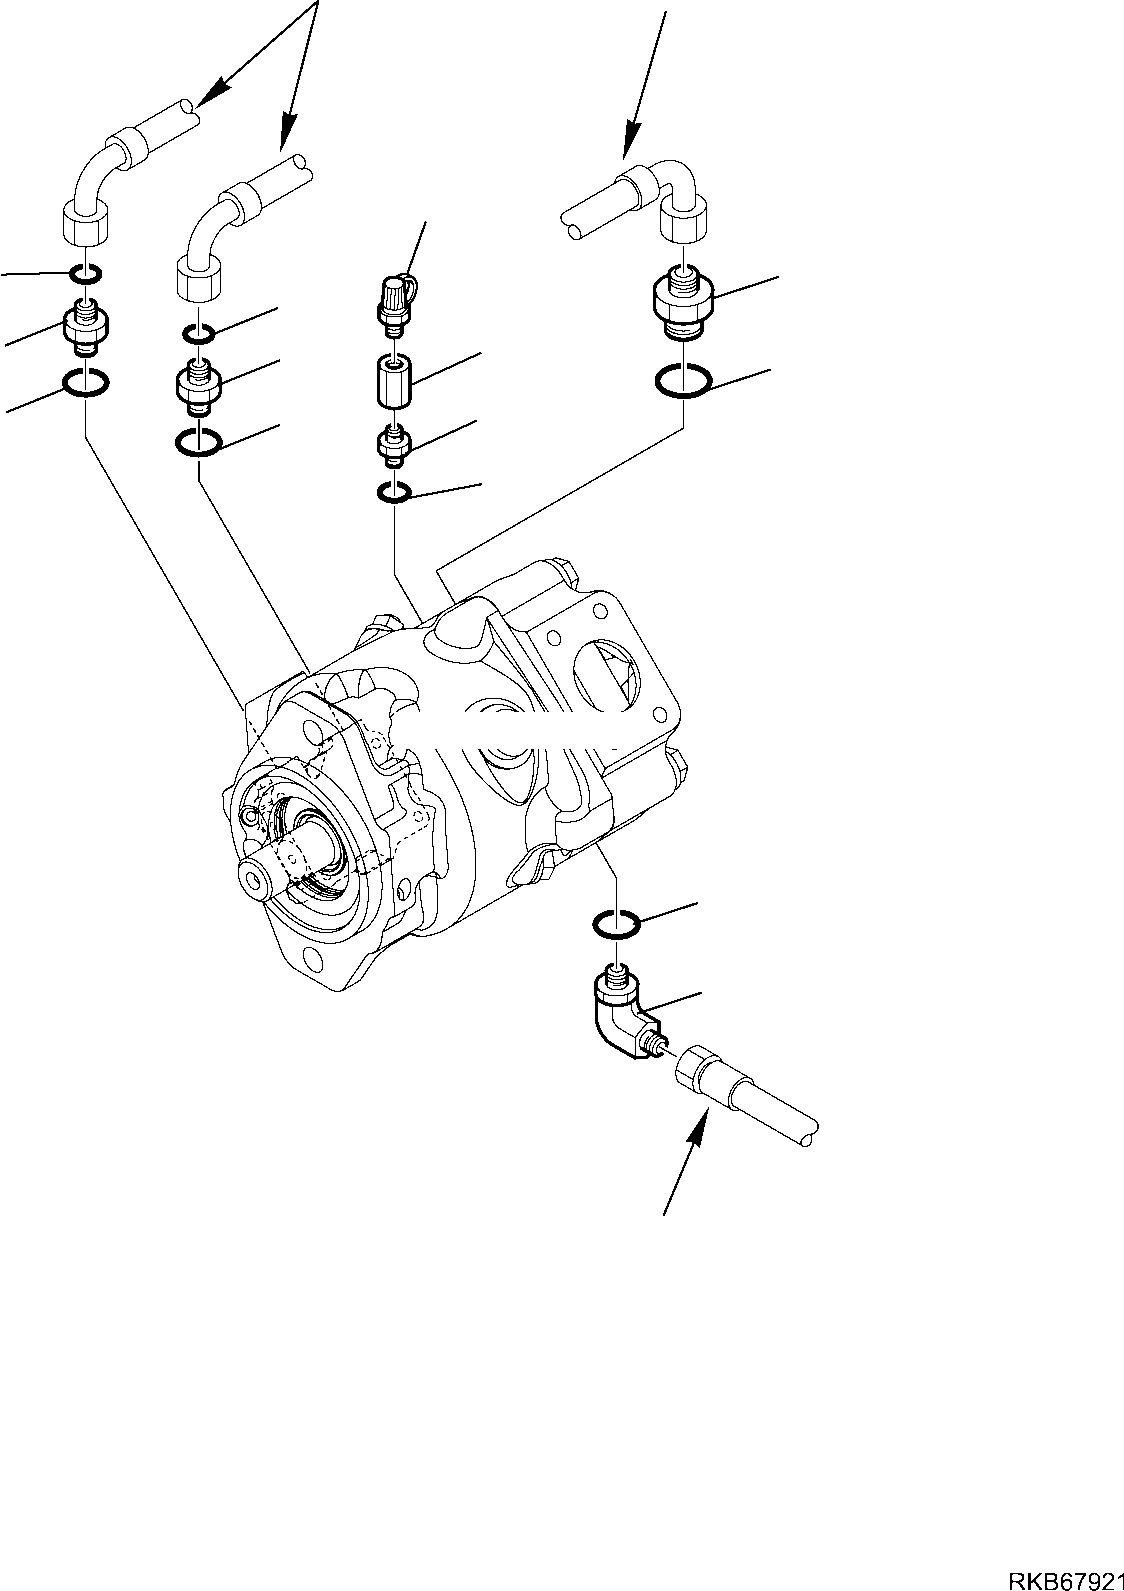 Part 4. HYDRAULIC PUMP (CONNECTING PARTS) [6105]